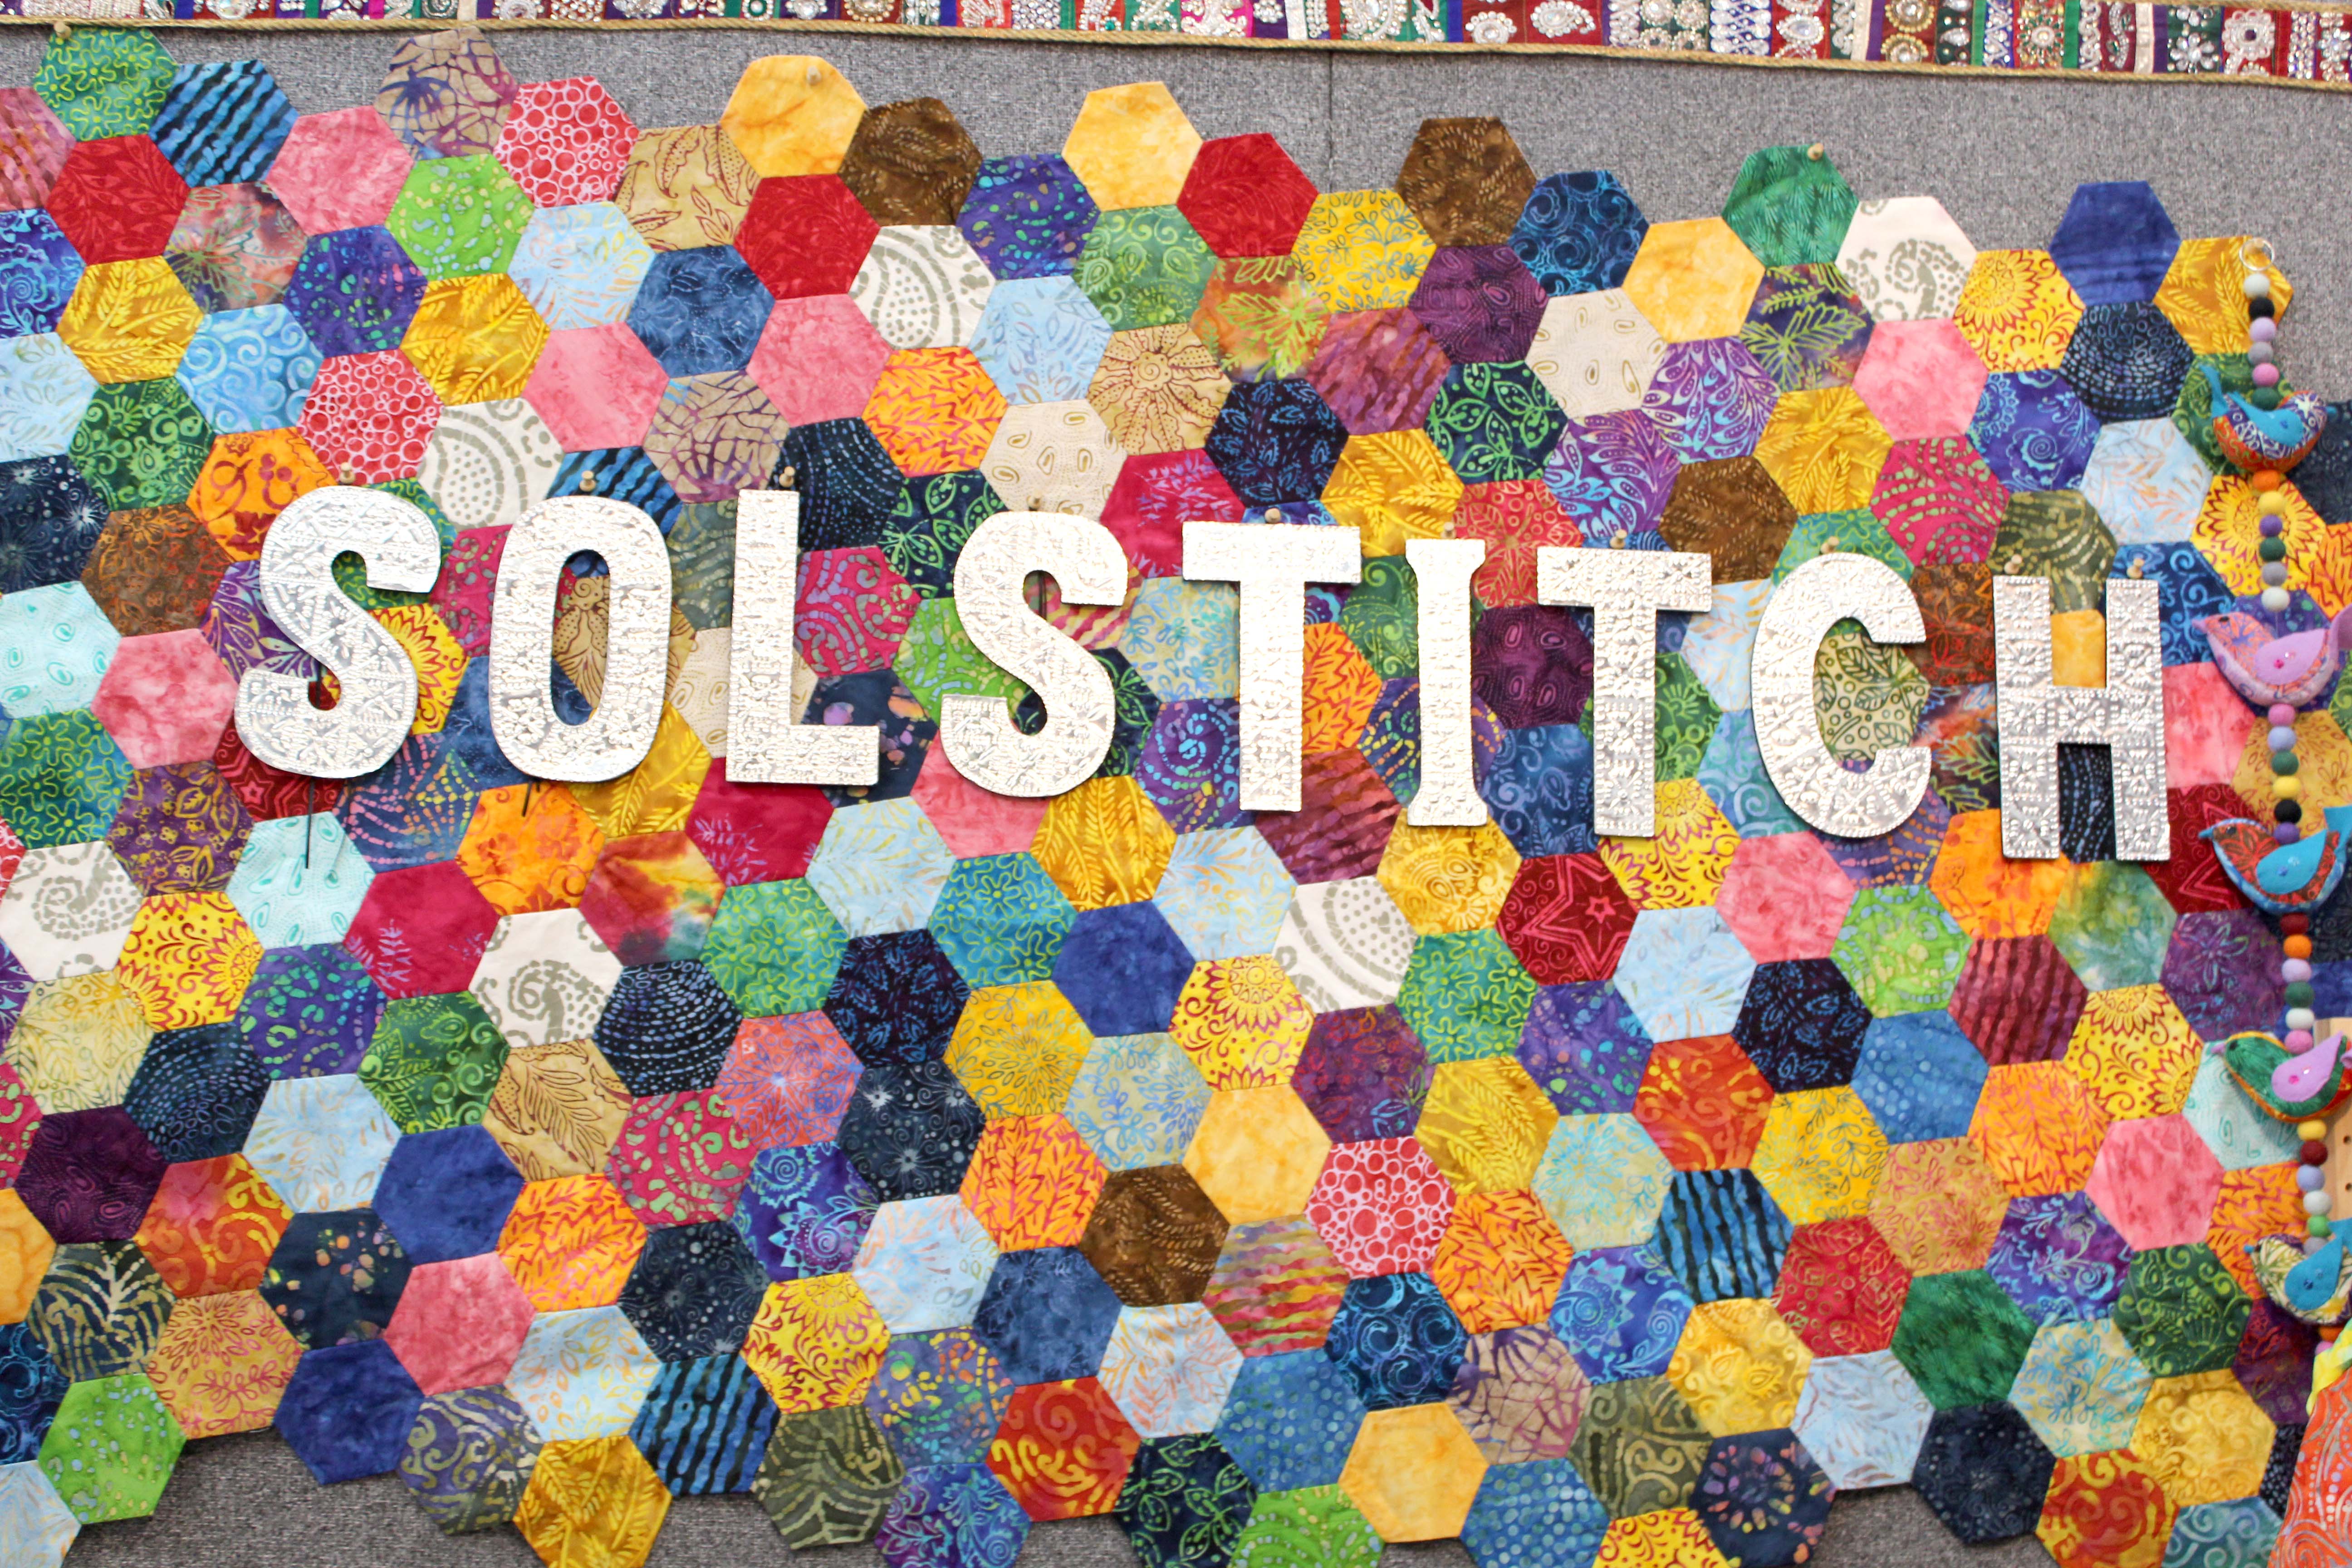 Solstitch Stand at the Knitting and Stitching Show 2018